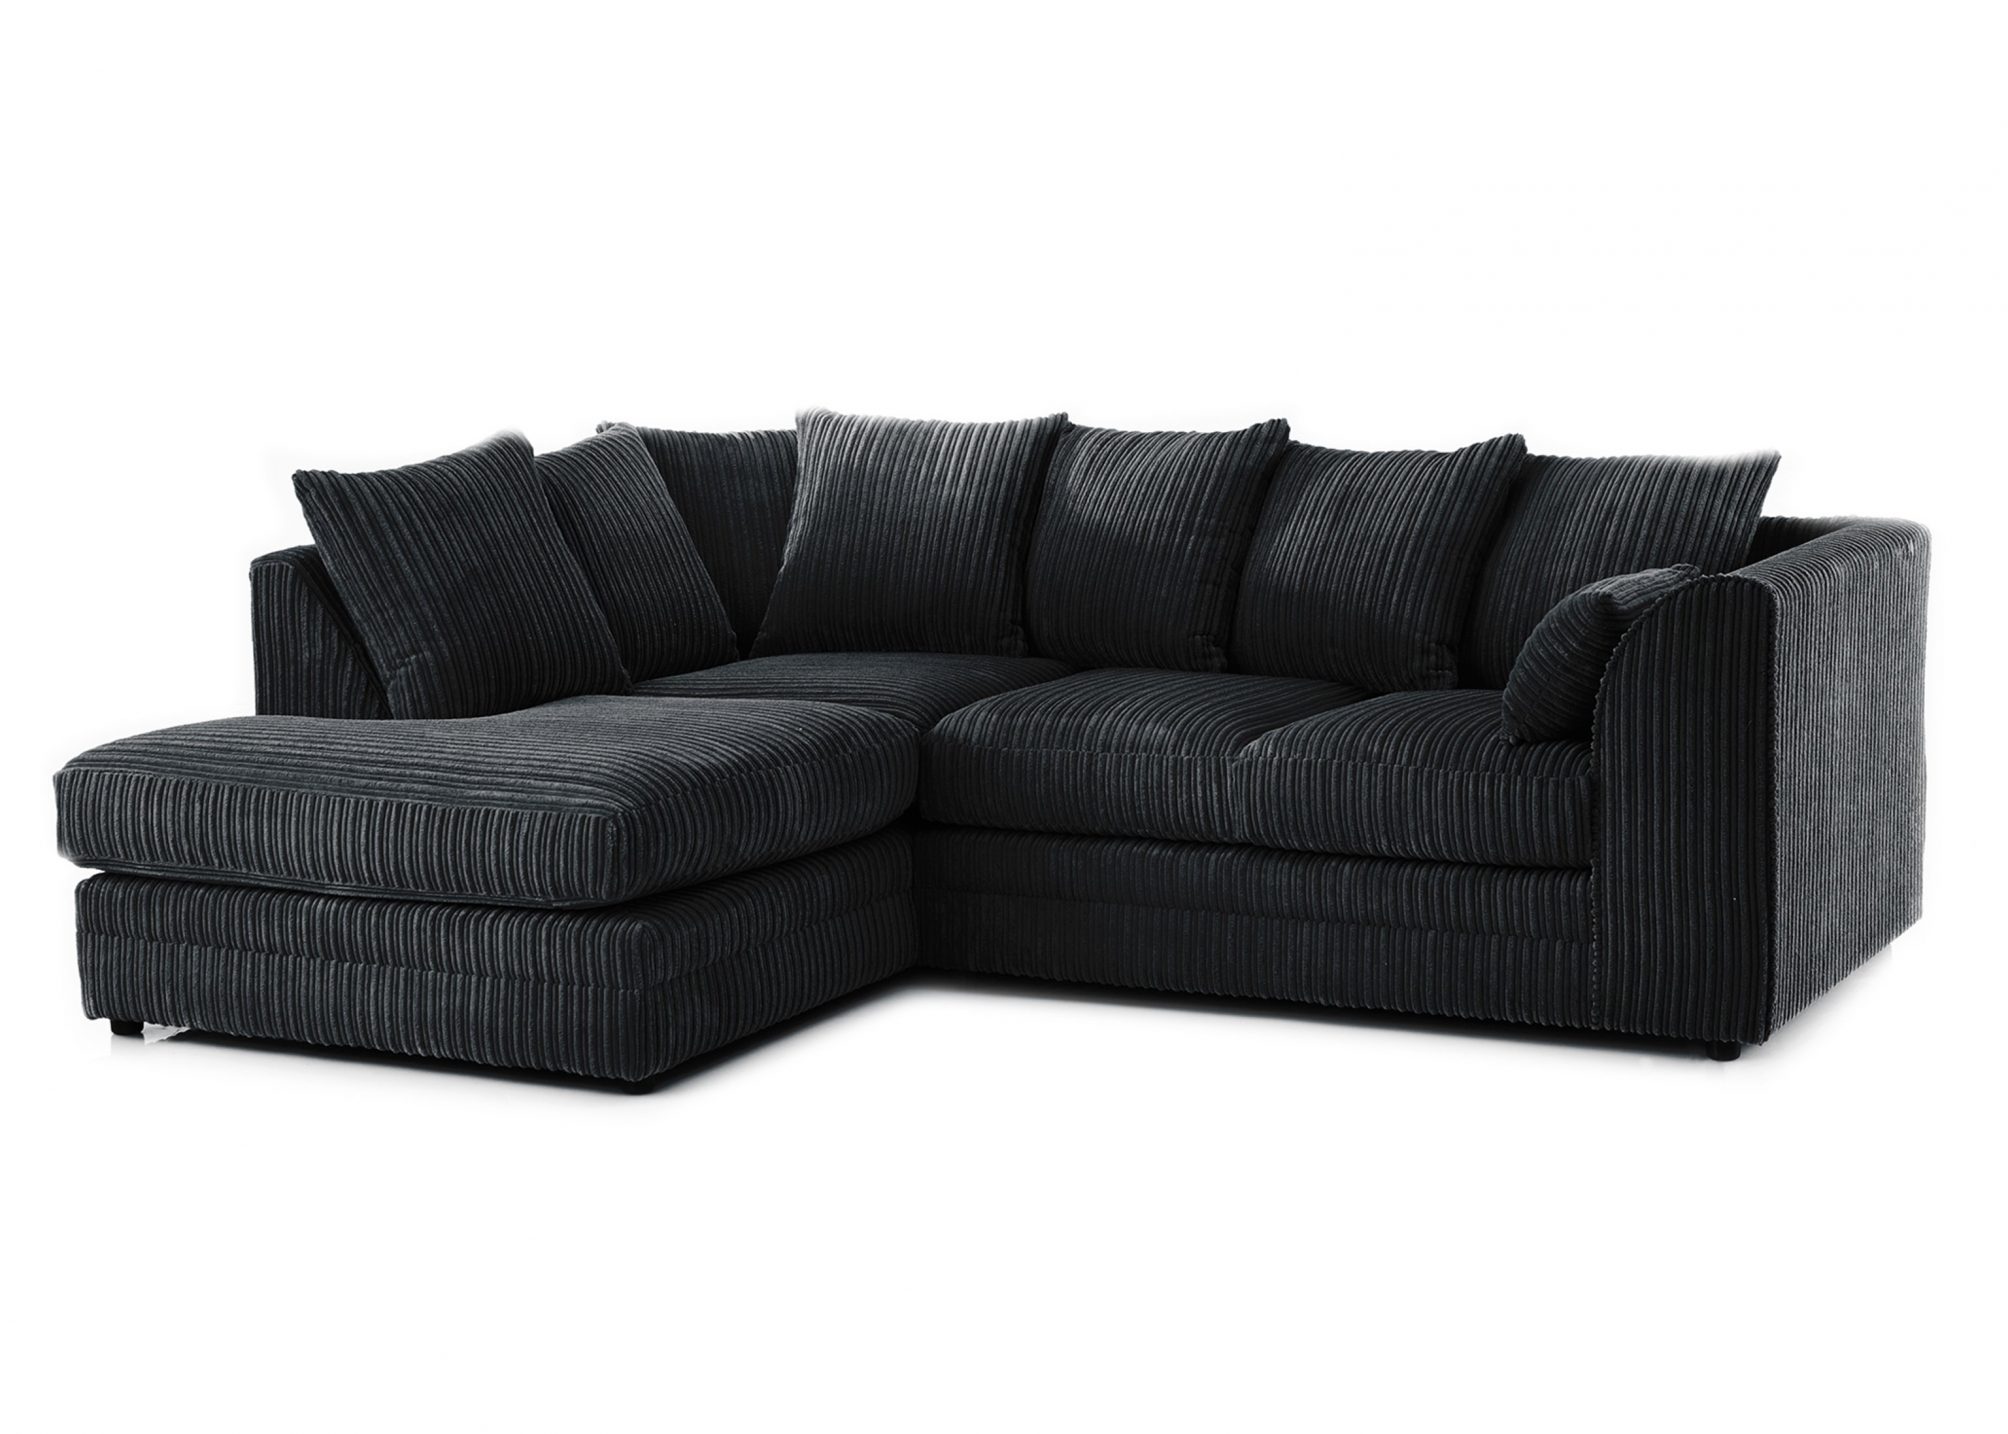 2 Seater, Black & Grey Black & Grey Fabric Jumbo Cord Sofa Settee Couch 3+2 Seater Footstool Left Hand Right Hand Corner Sectional Couch Set 